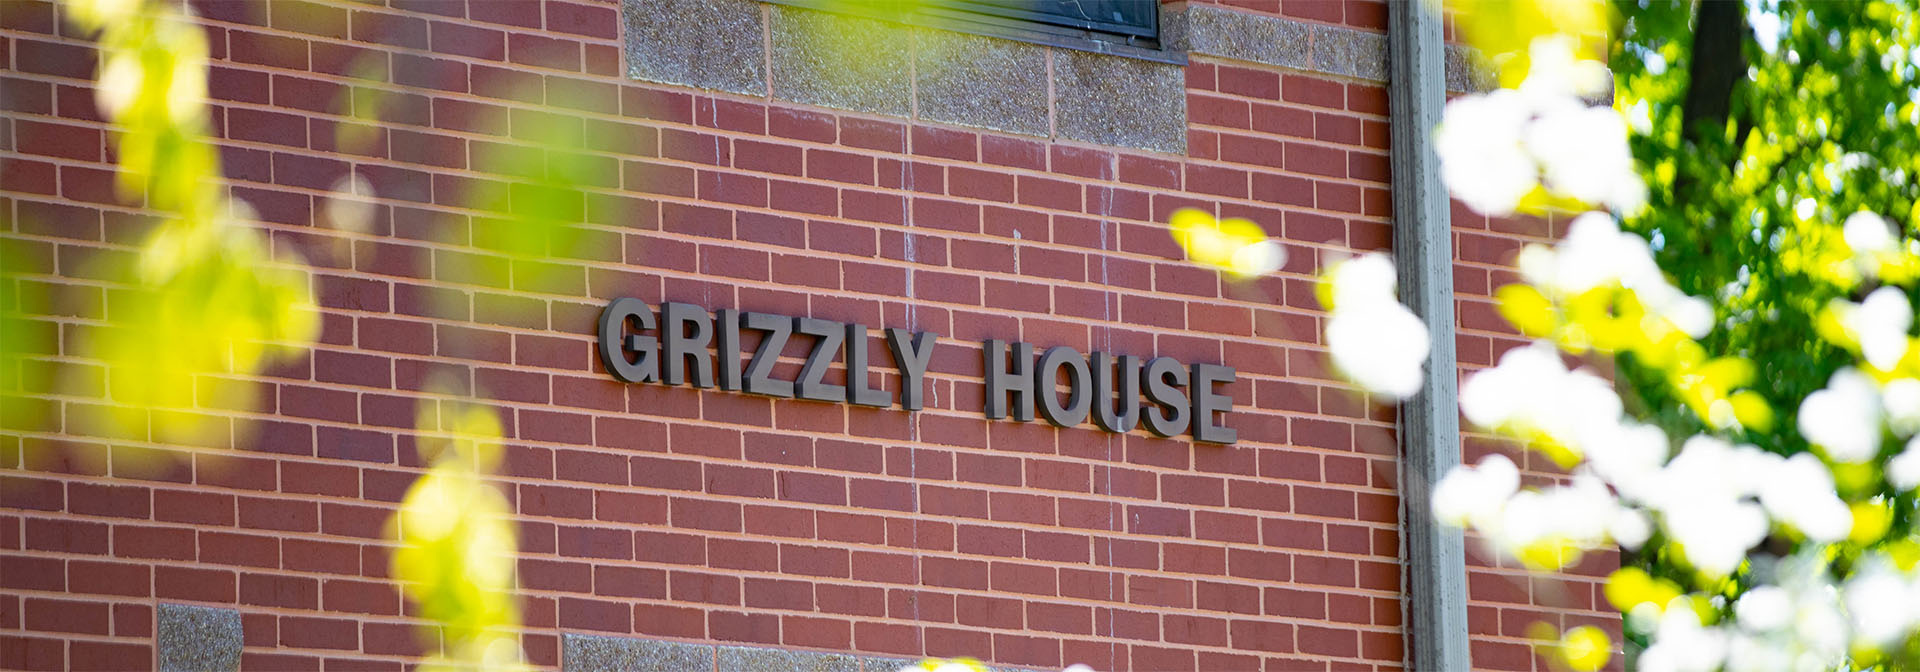 Grizzly House Sign on Building